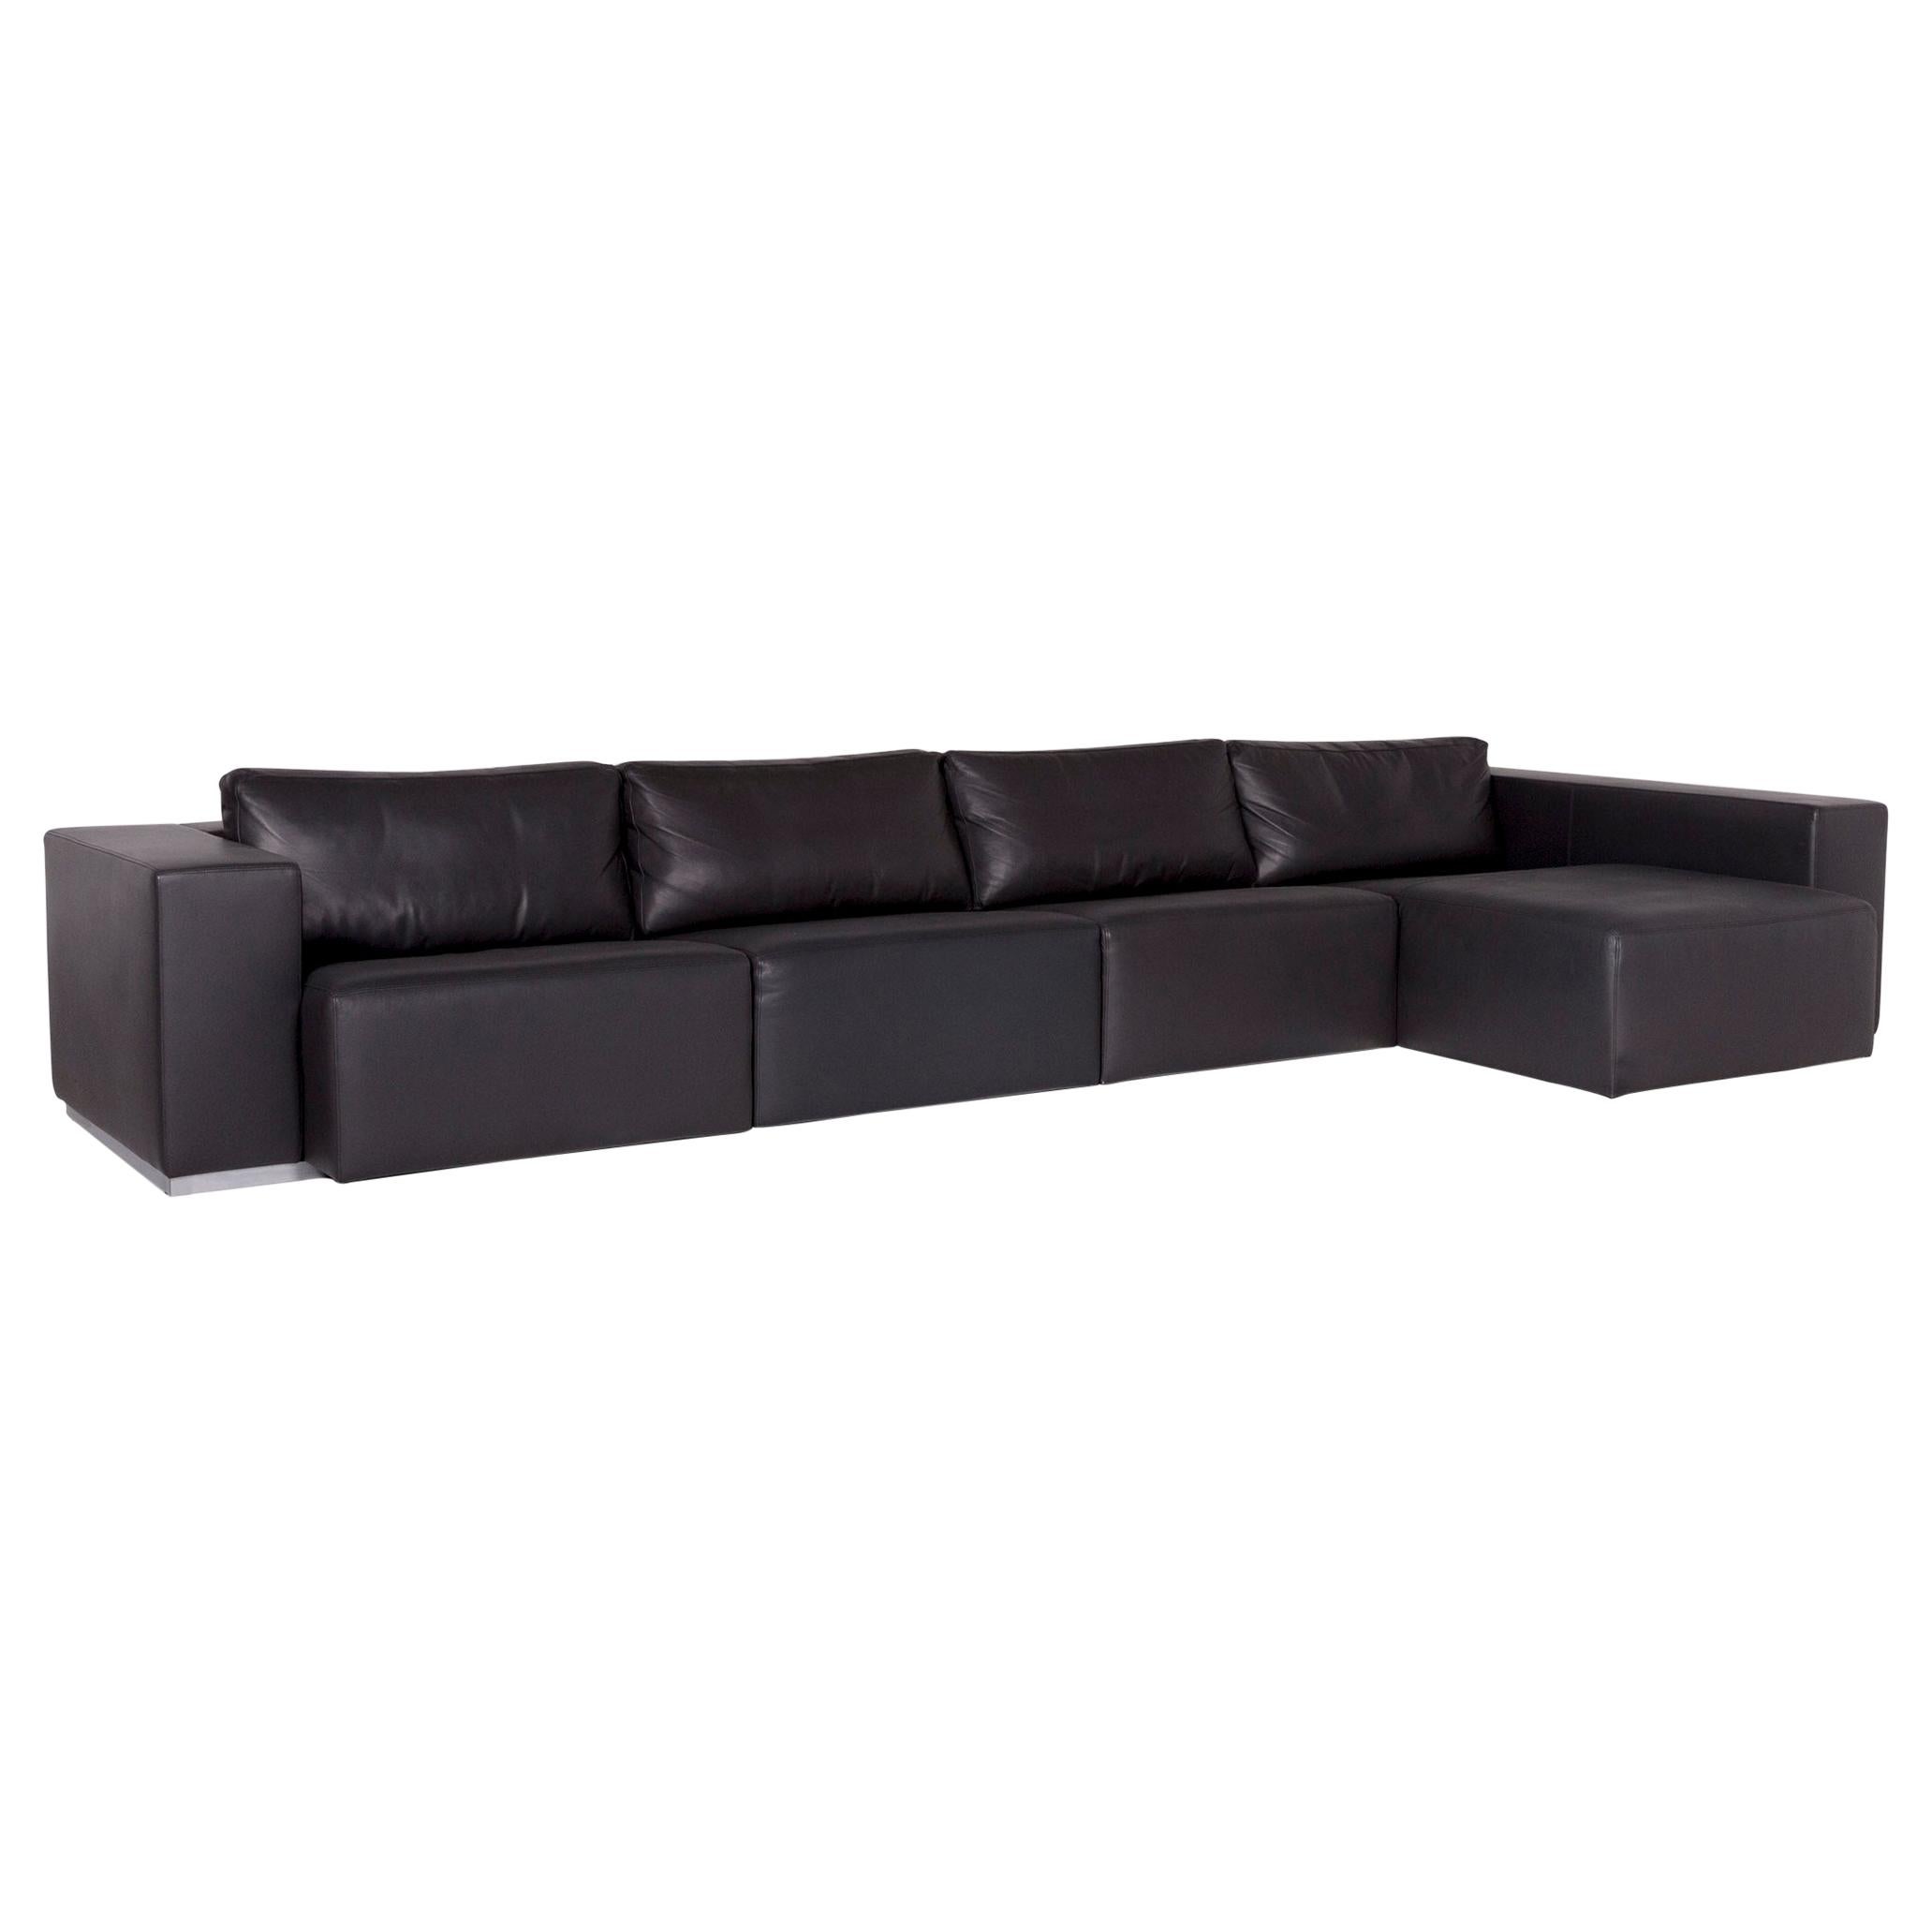 Walter Knoll Nelson Leather Corner Sofa Gray Sofa Couch For Sale